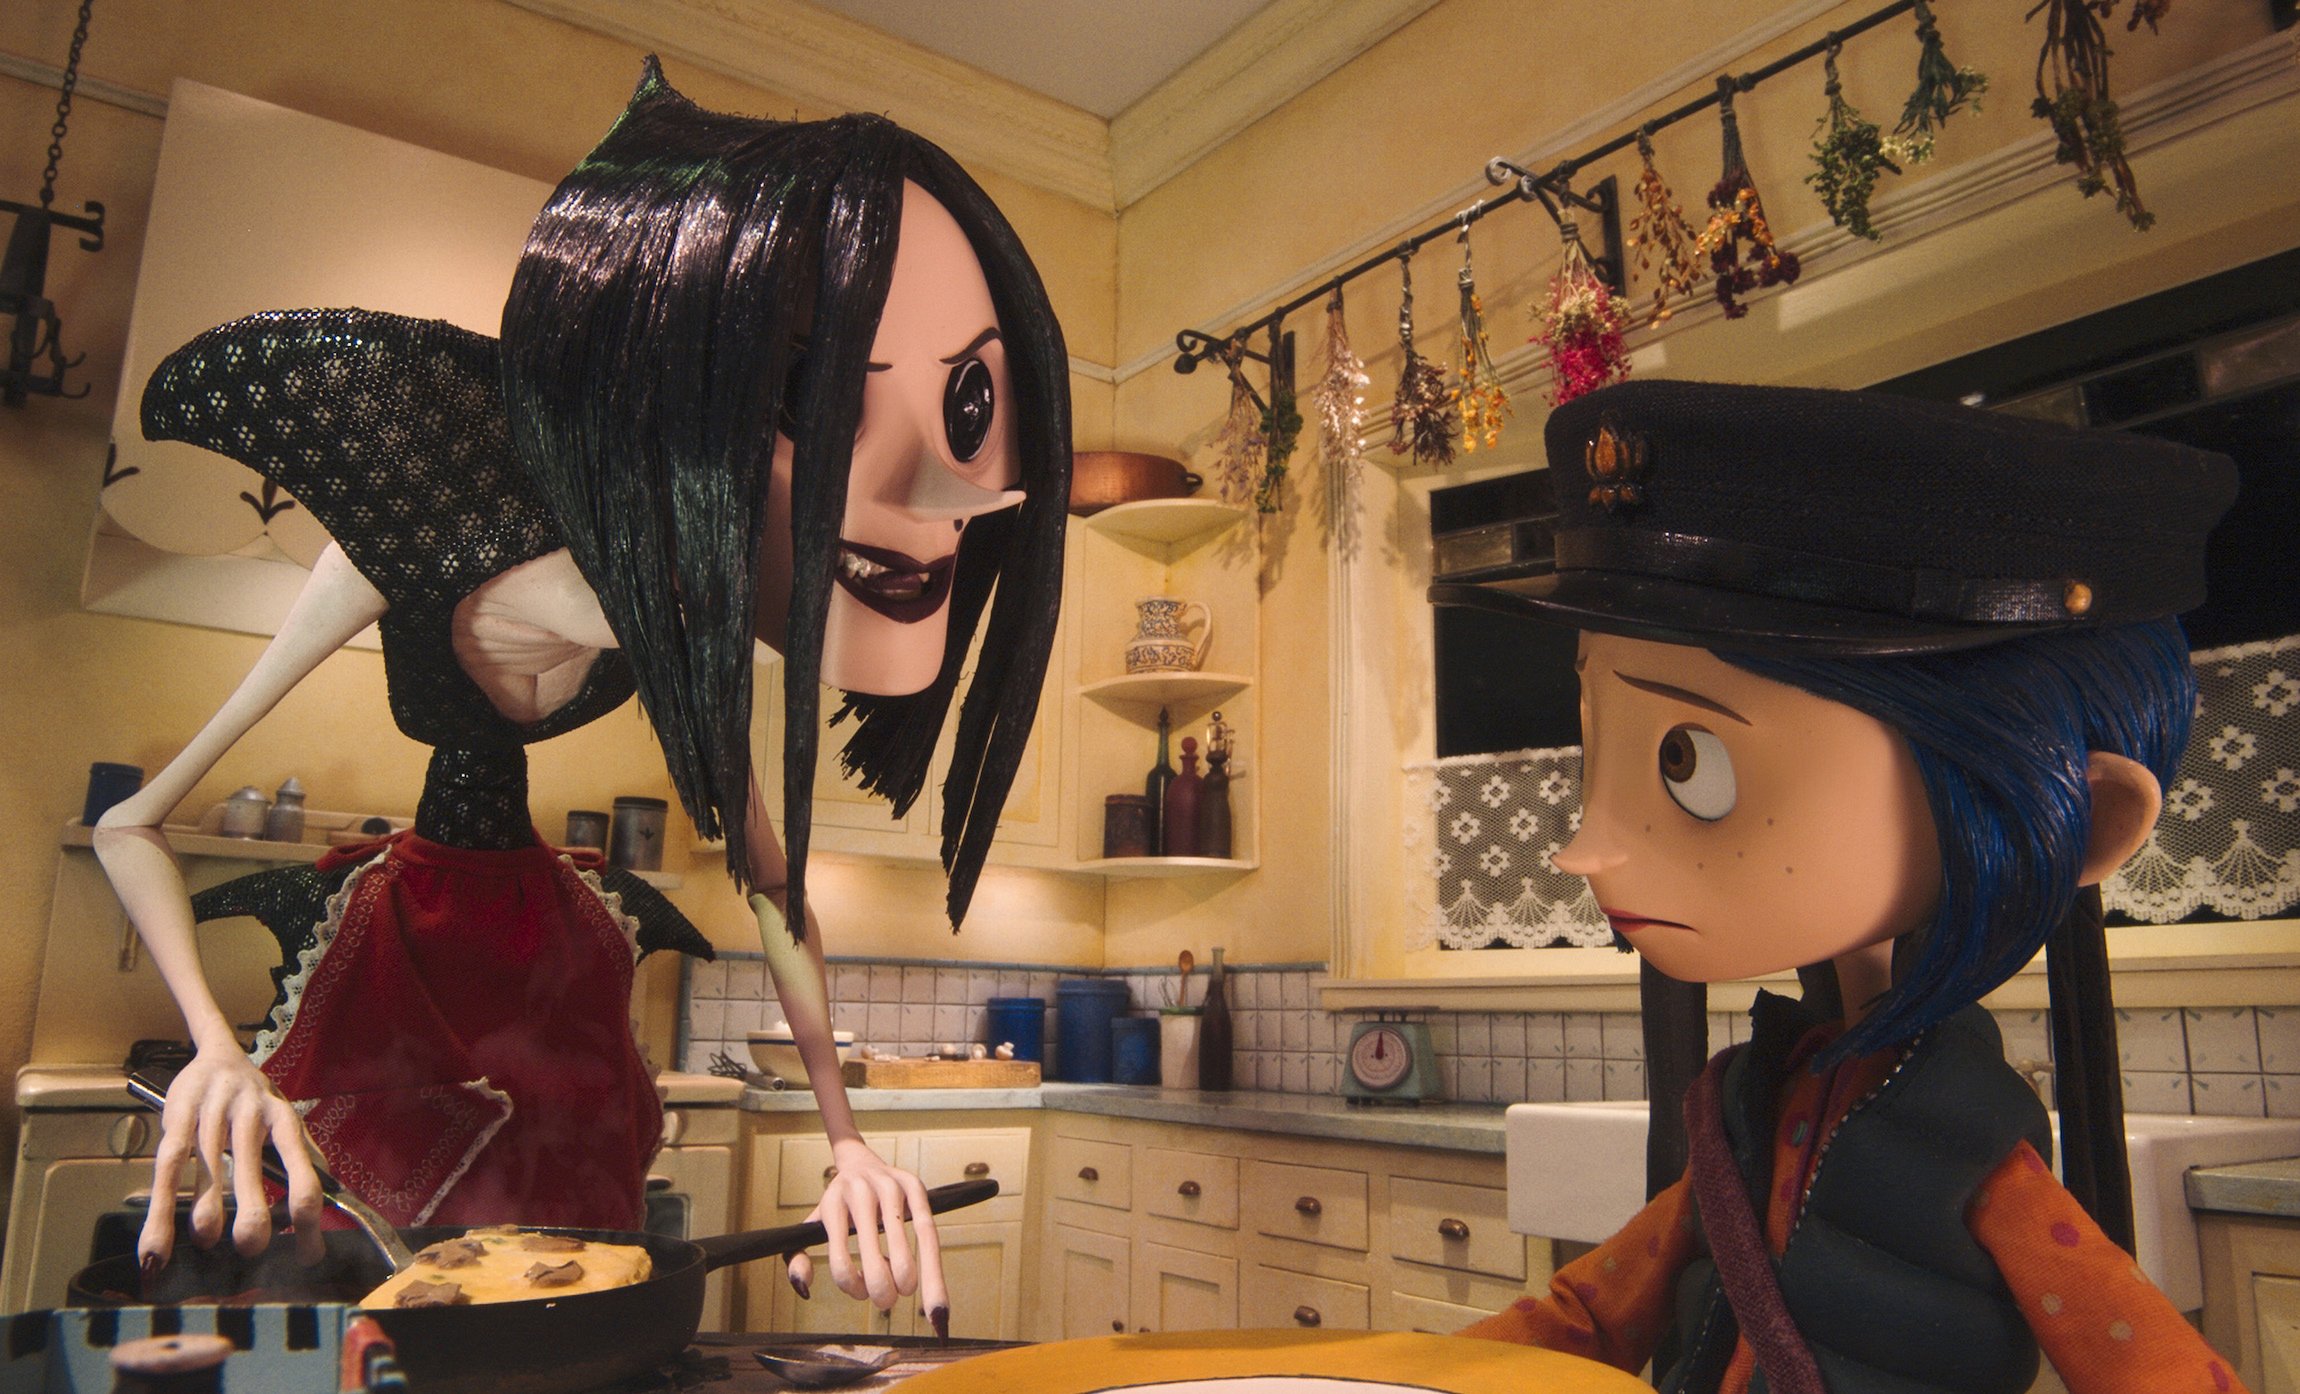 Catholic Movie Club: 'Coraline' is a love story with an edge